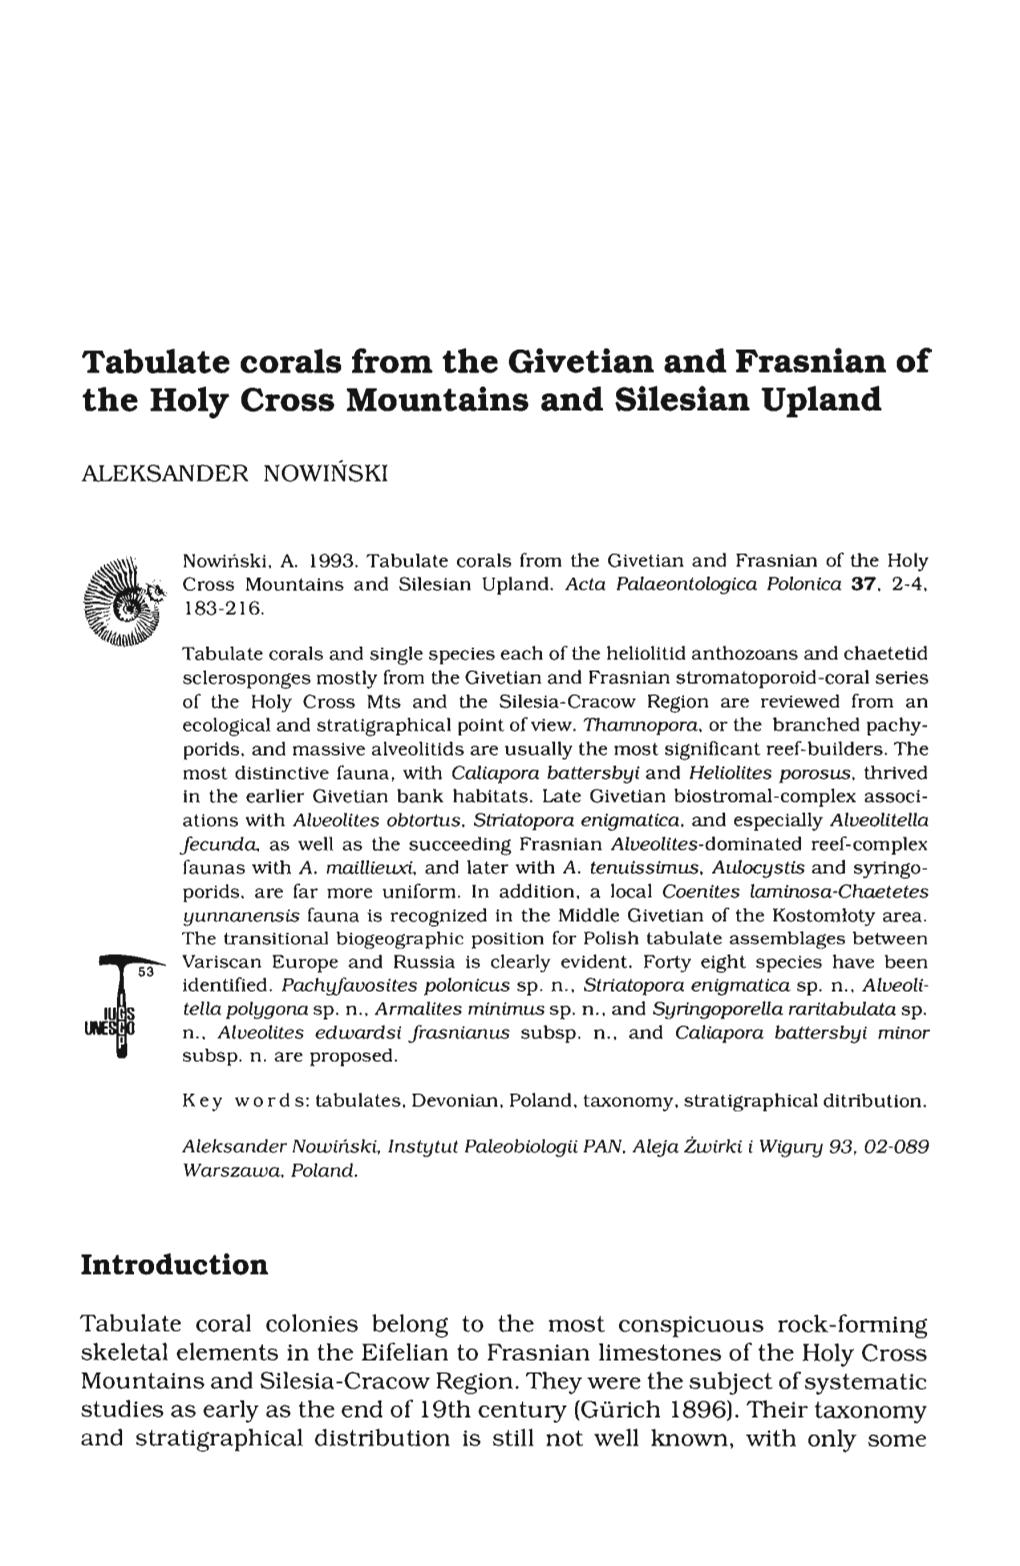 Tabulate Corals from the Givetian and Frasnian of the Holy Cross Mountains and Silesian Upland